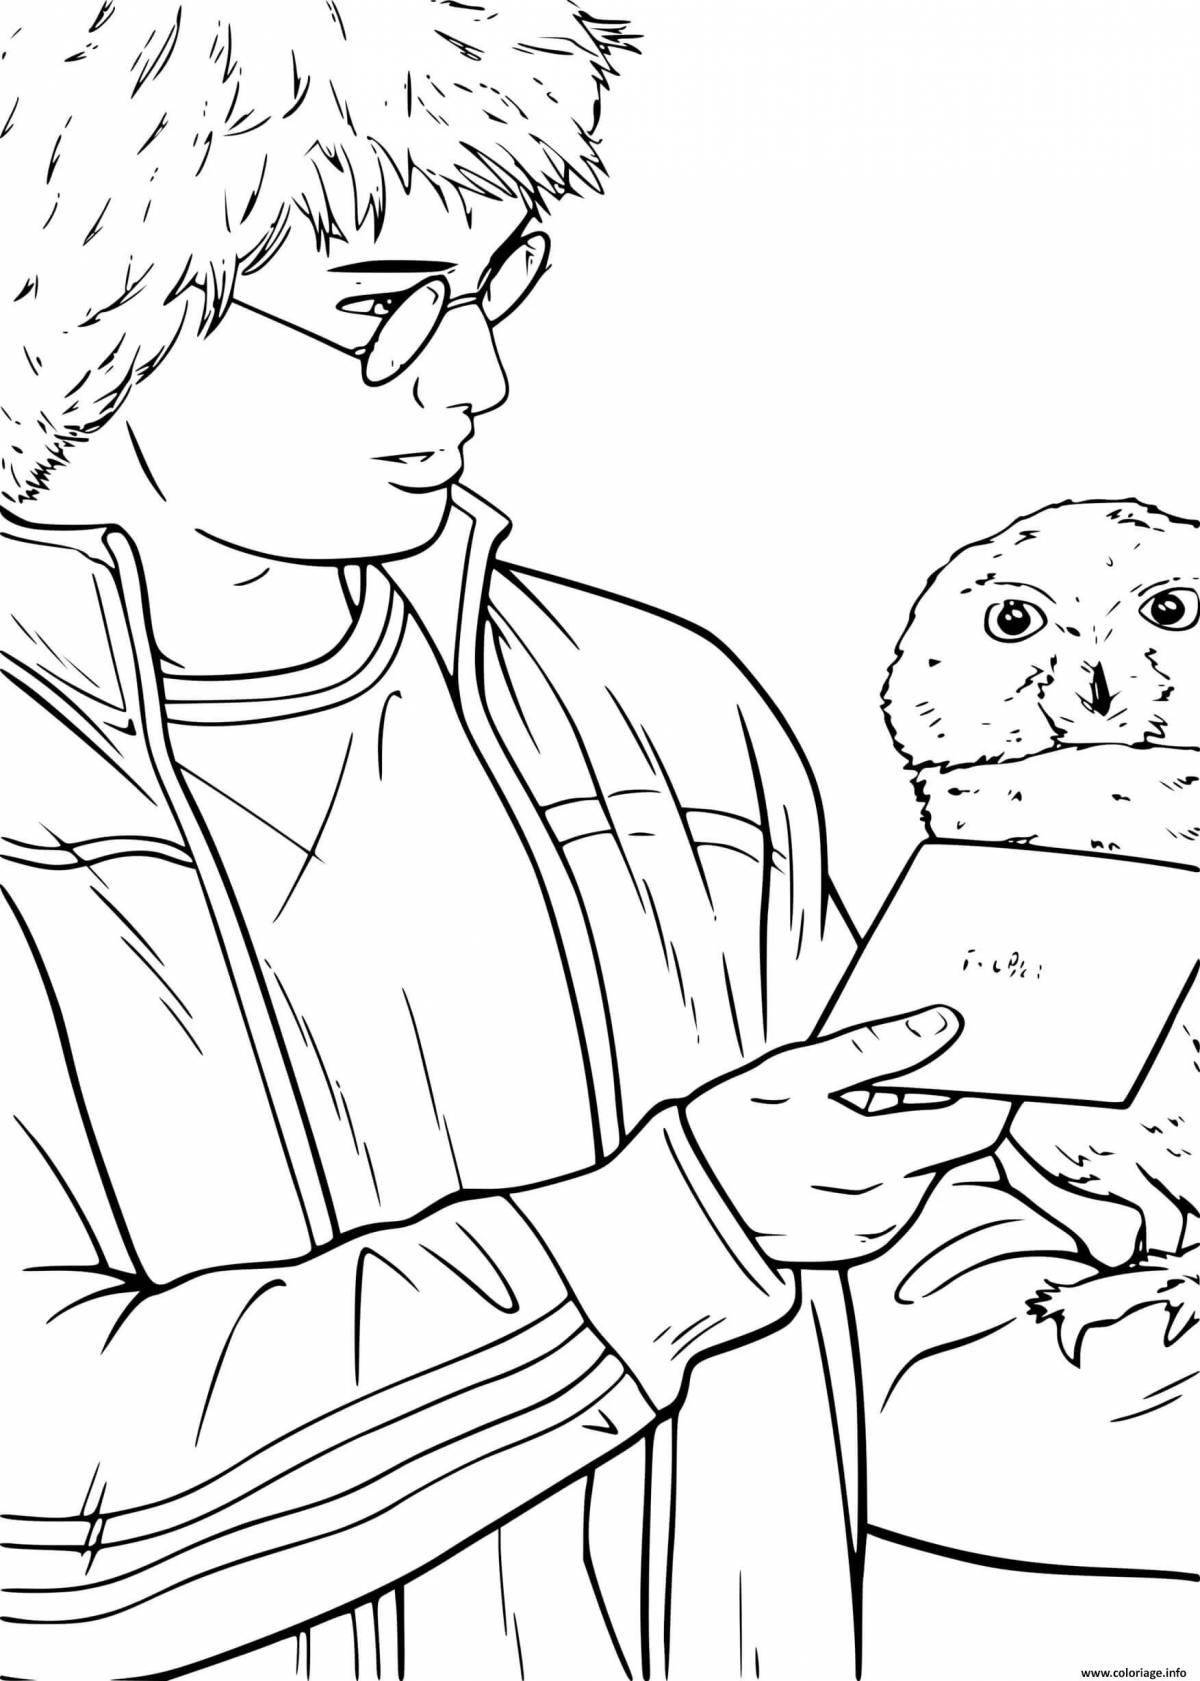 Coloring page dazzling potter